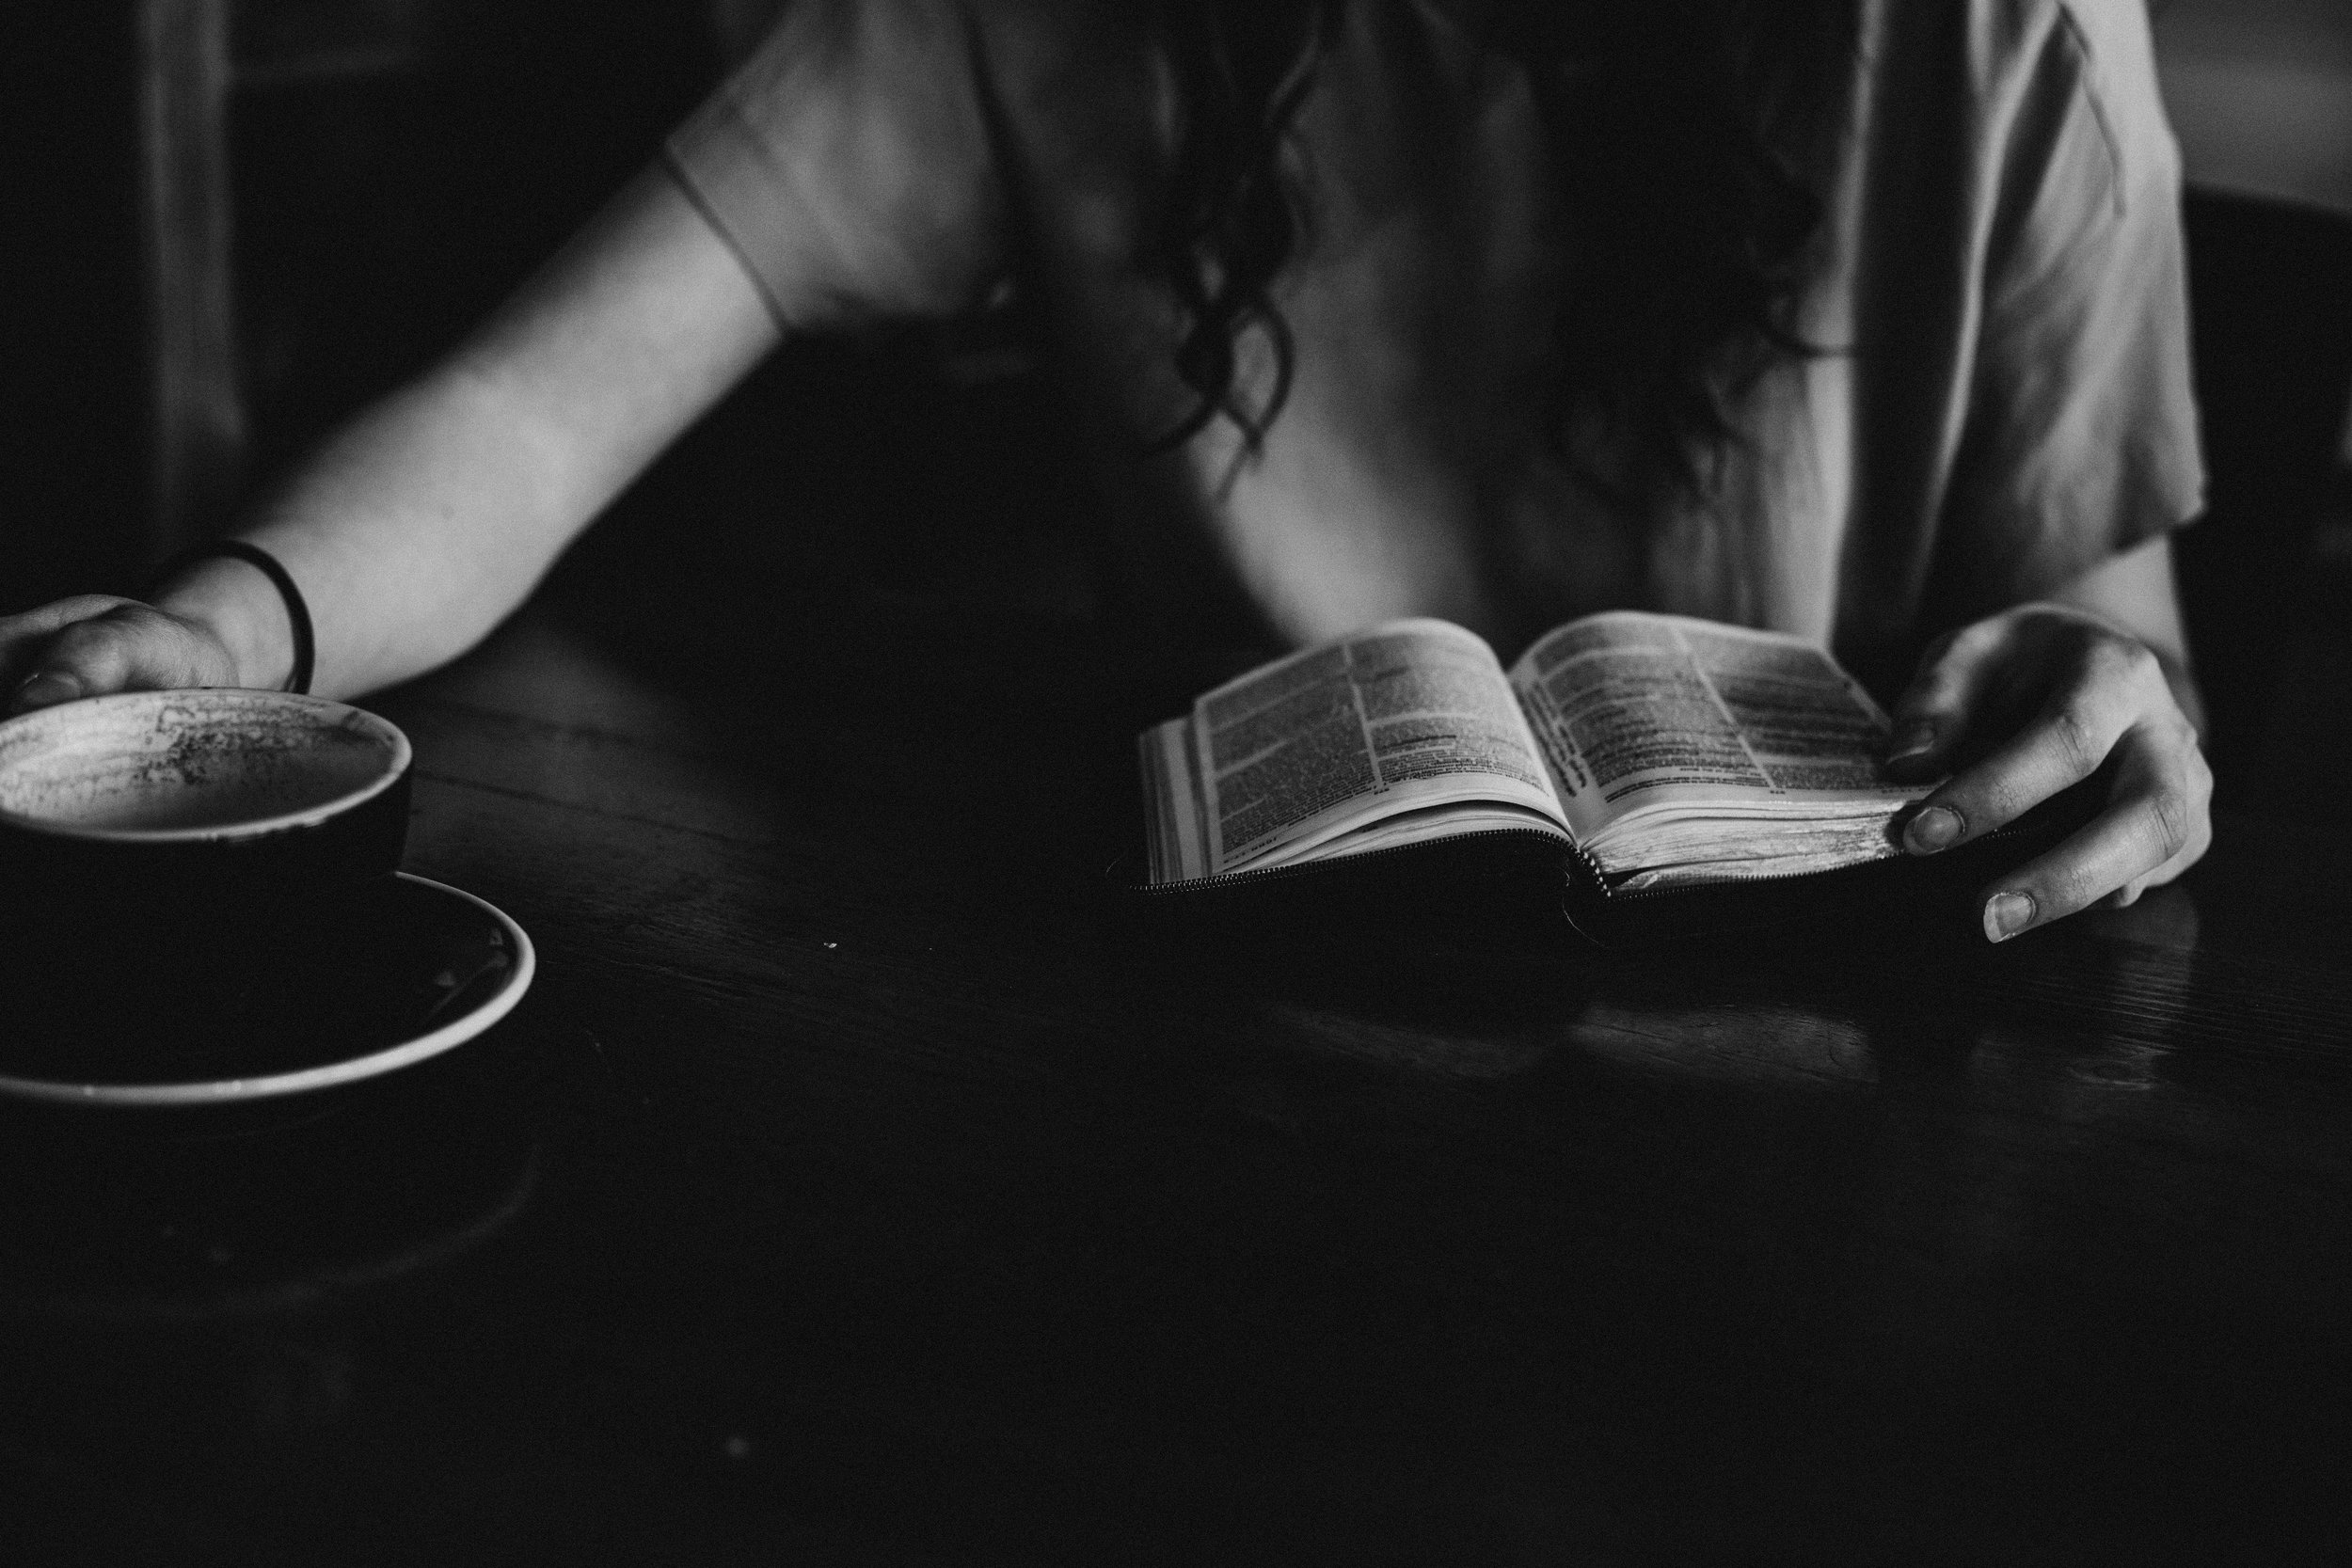 A woman reads a book at a table while reaching for a coffee